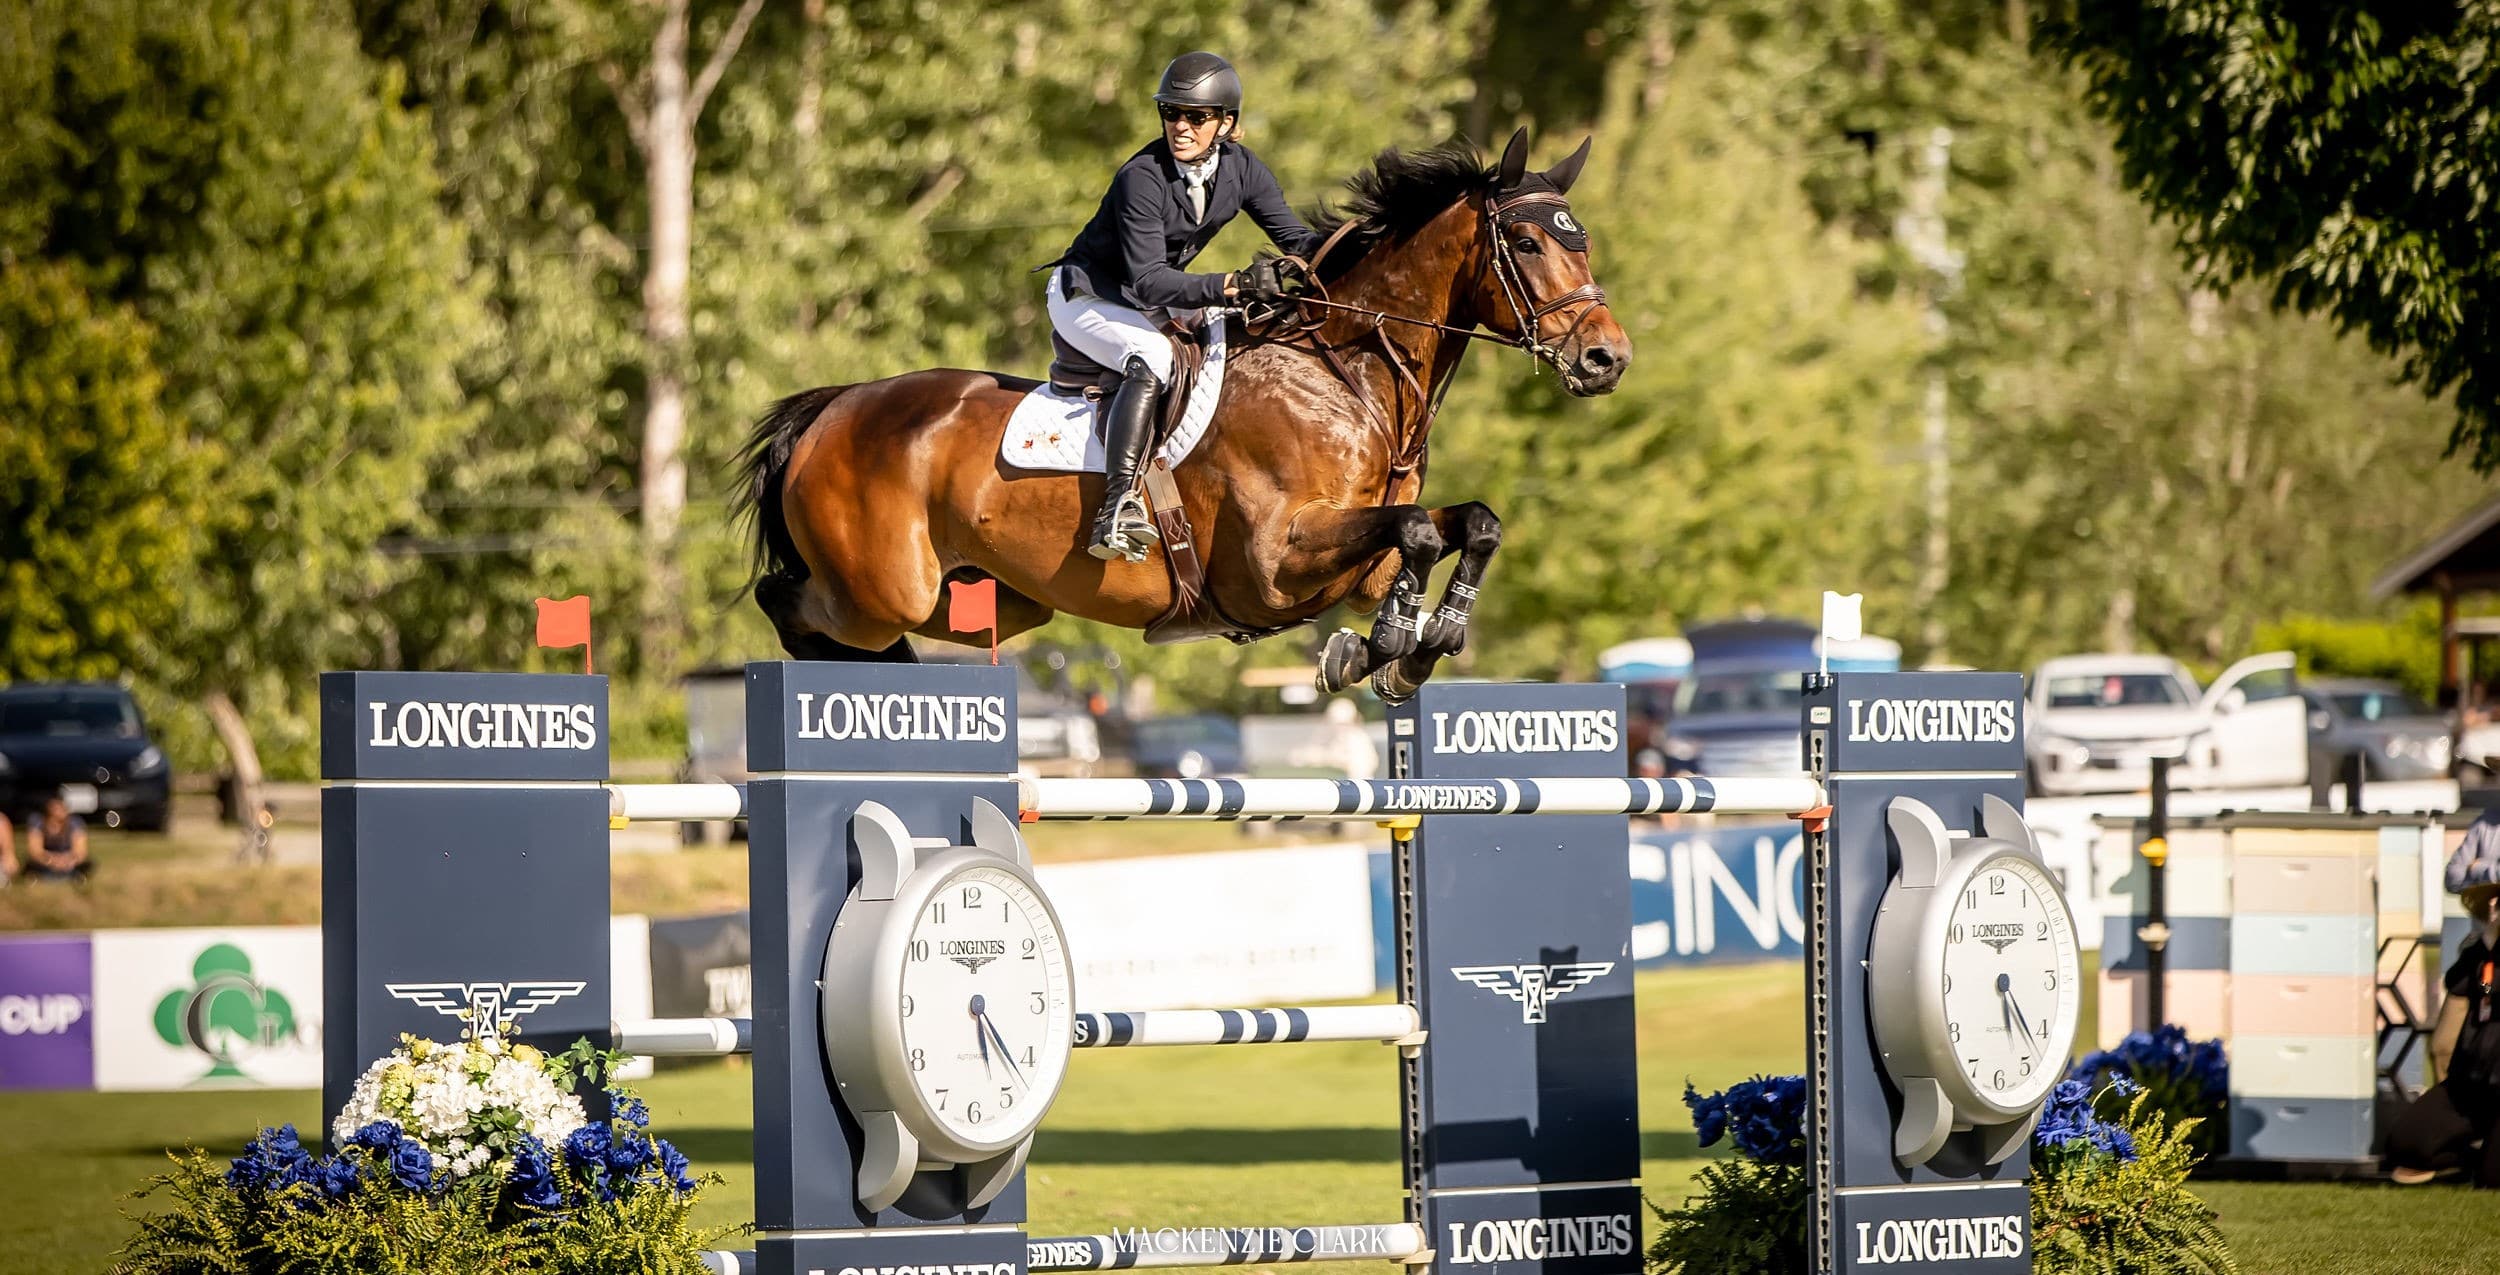 Thumbnail for Shawn Casady and NKH Cento Blue Take Longines Grand Prix